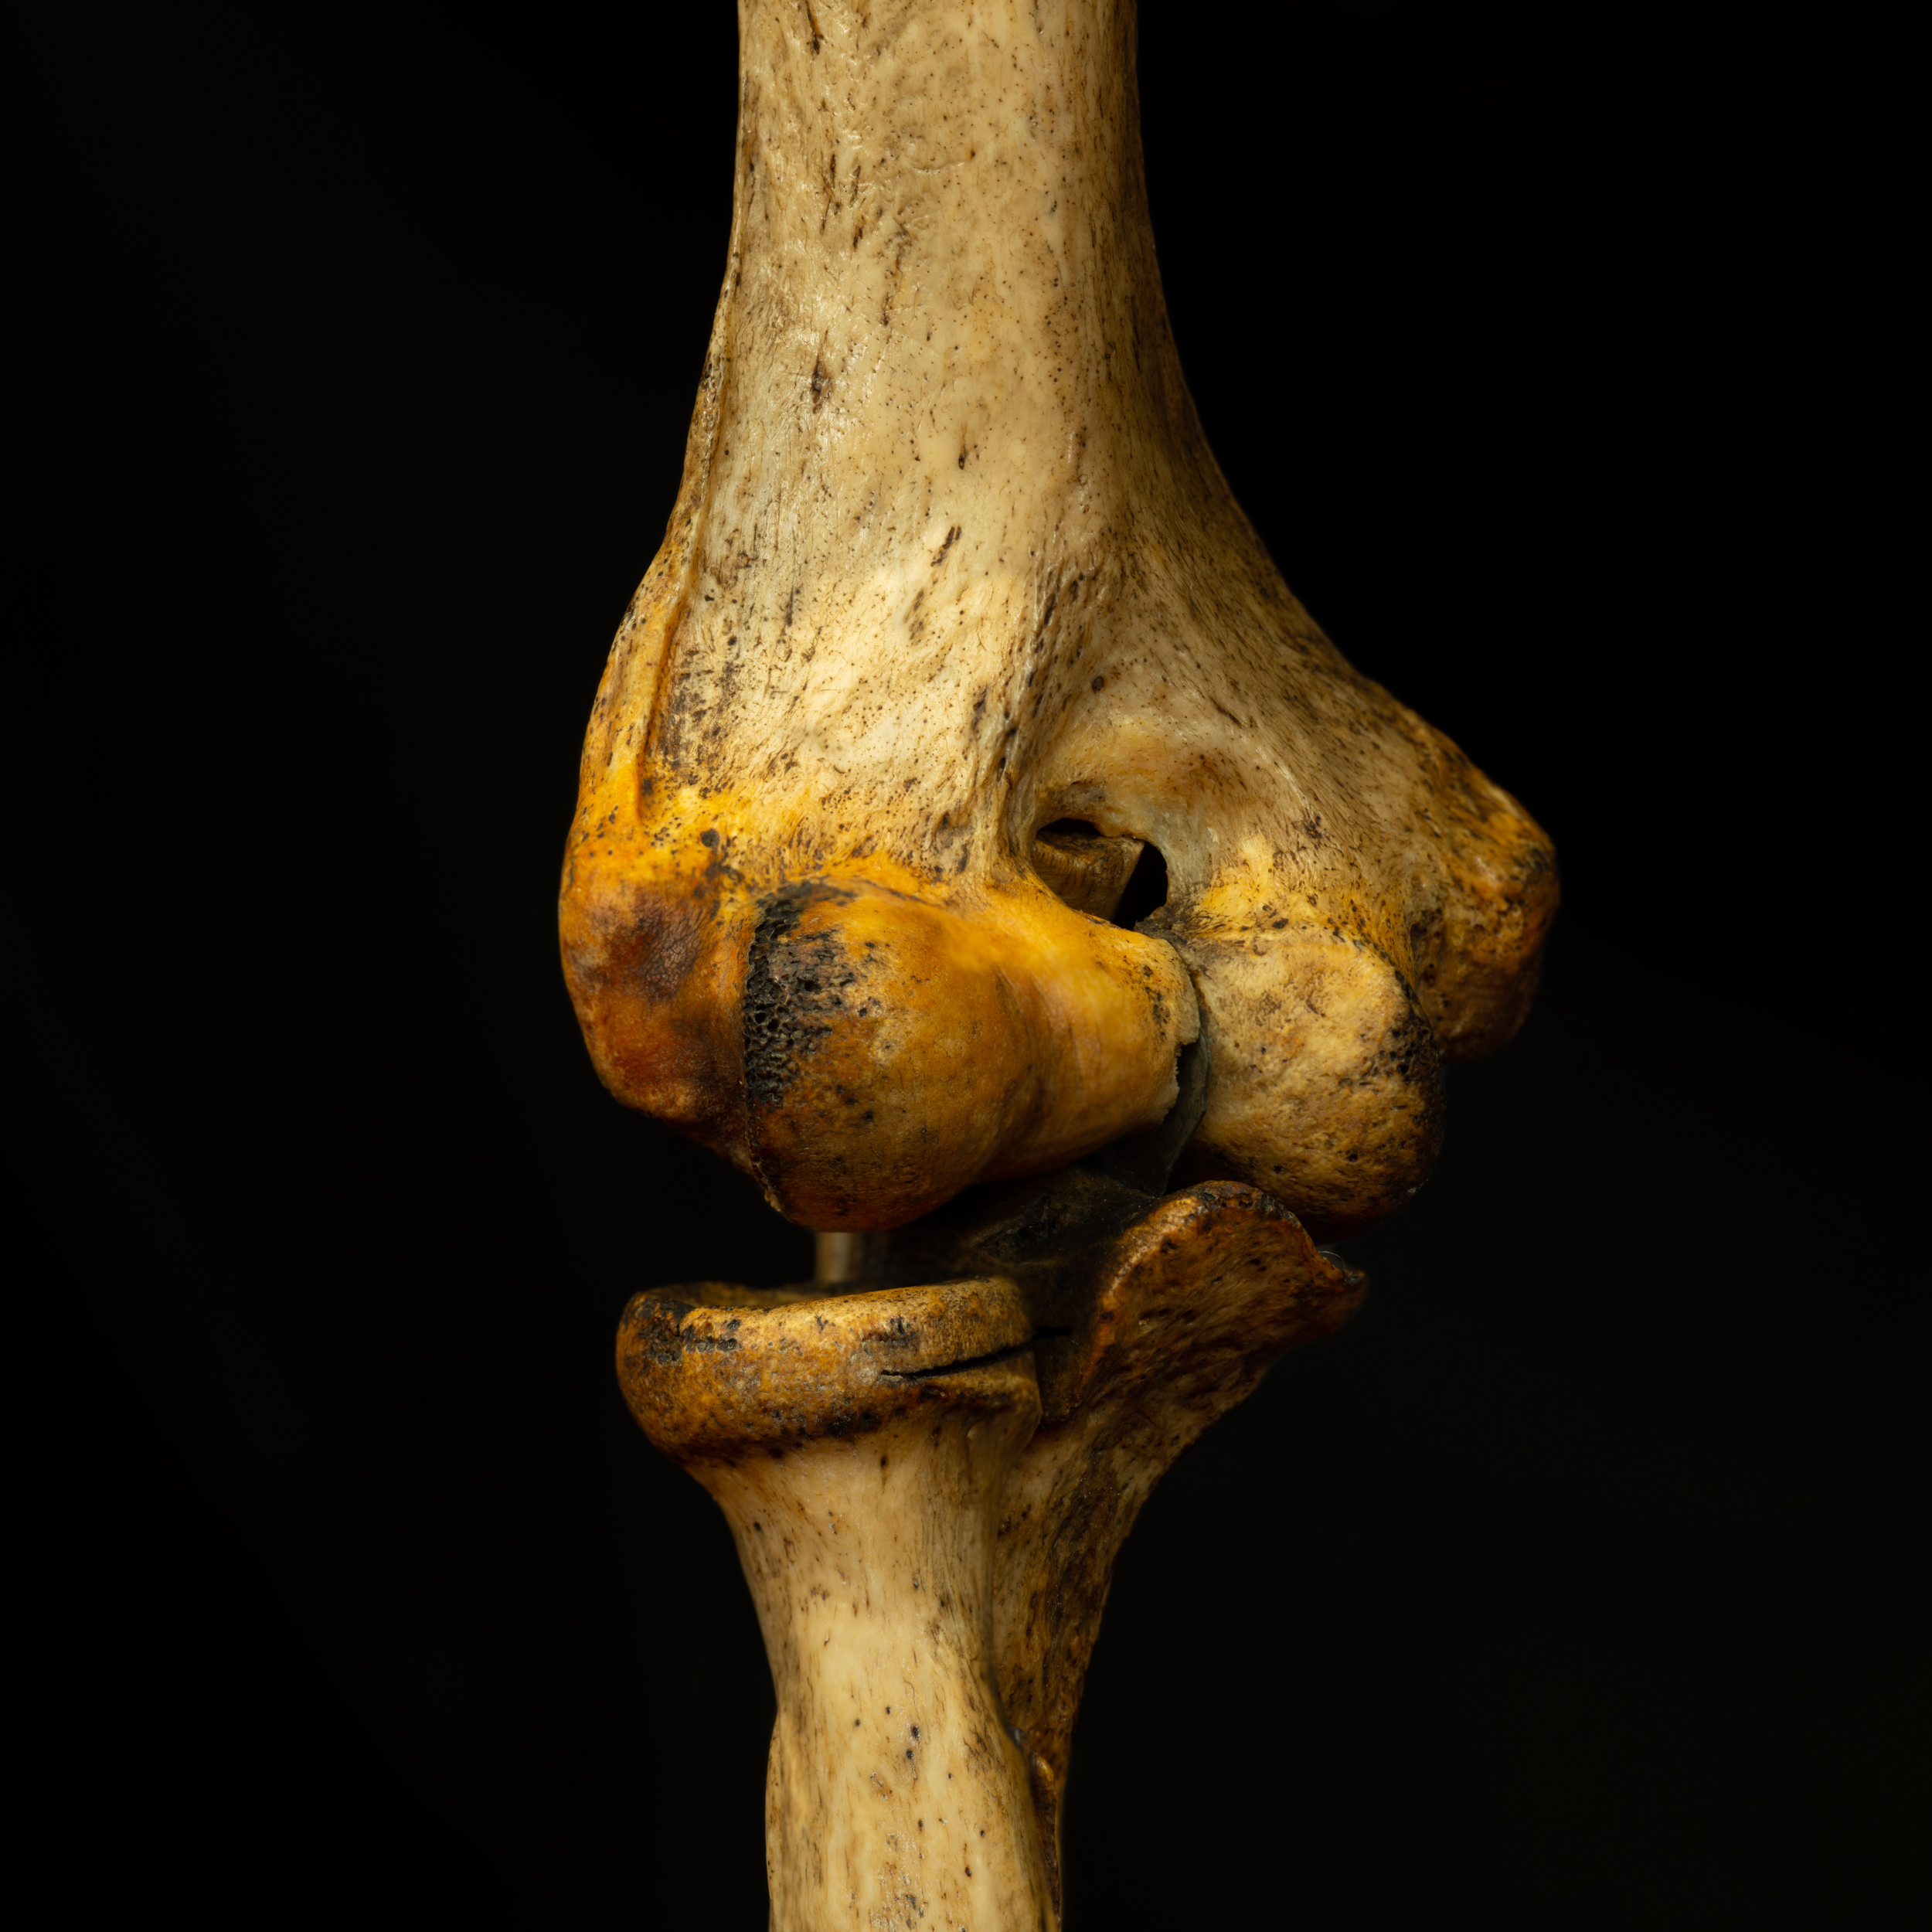 Close up detail shot of knee bone, colour on black background, there is black pitting on the joint